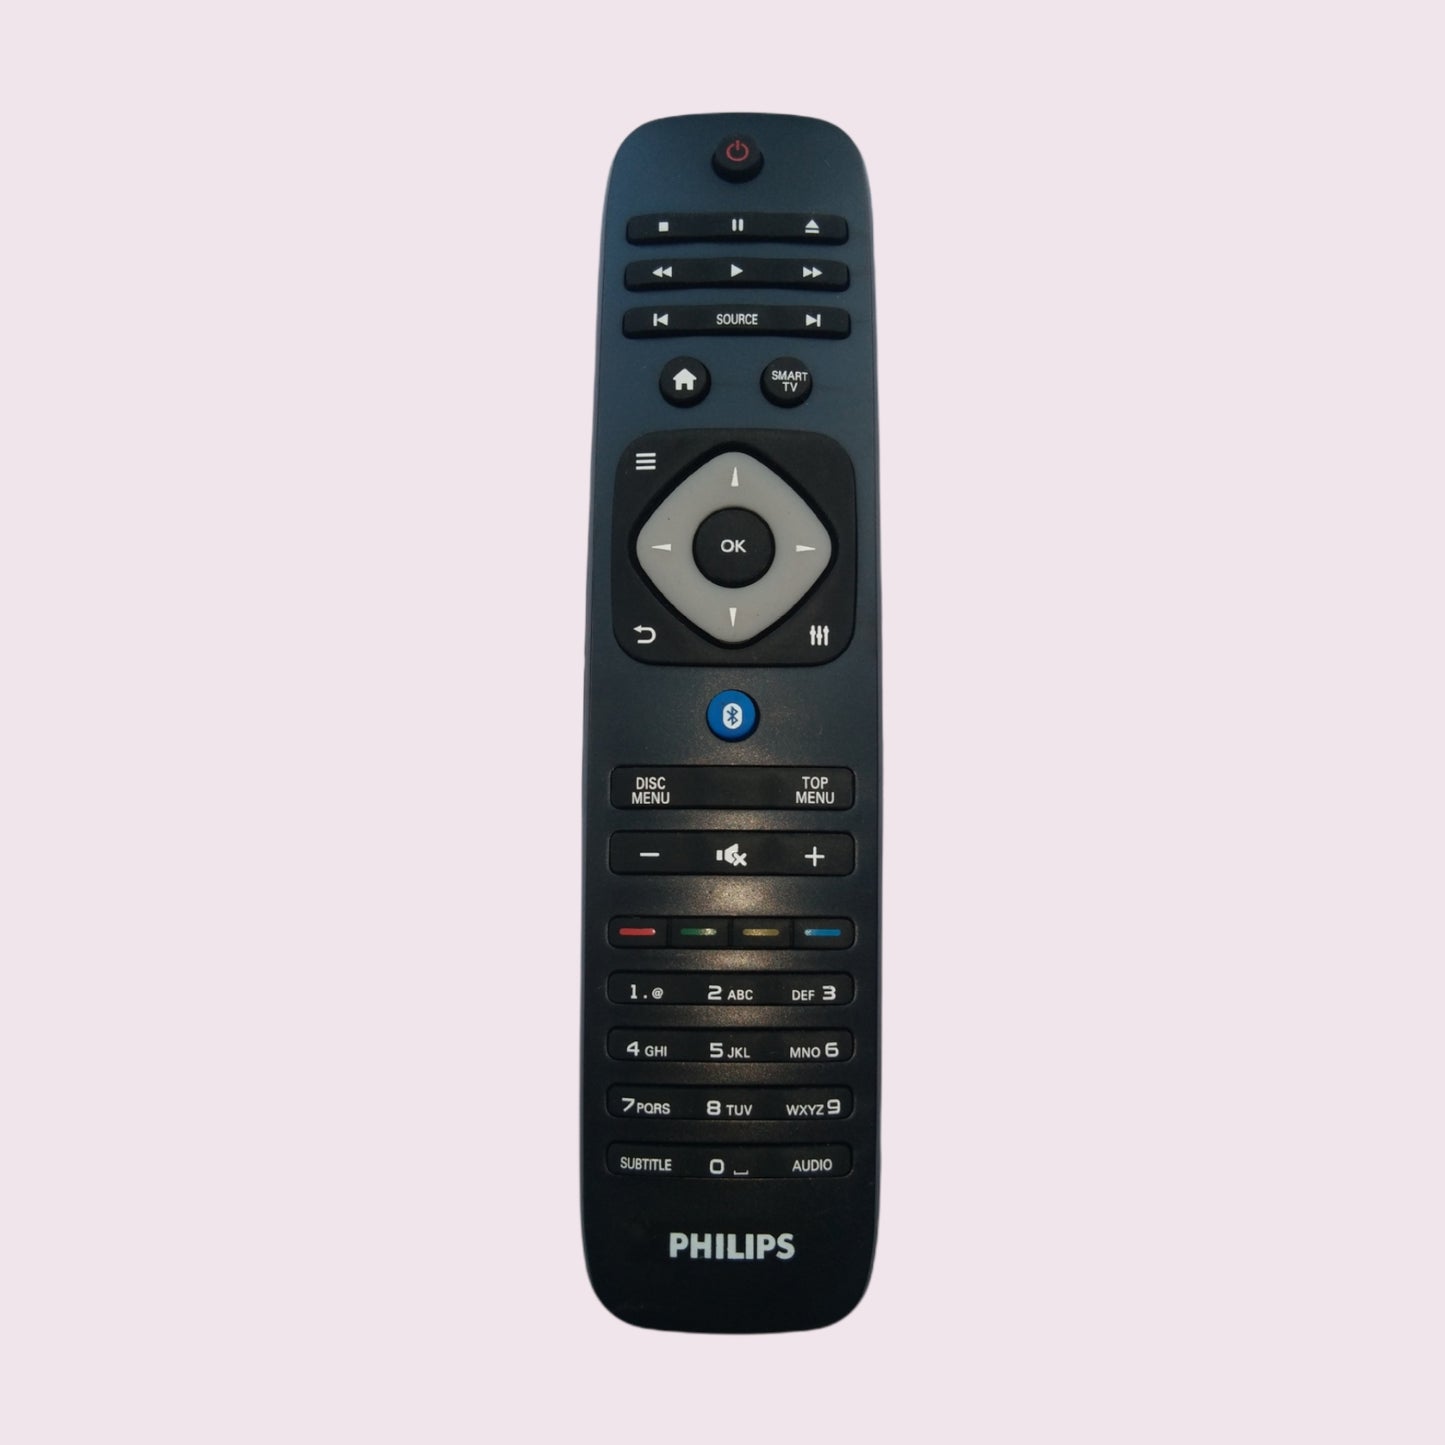 Philips smart TV remote control with Bluetooth option - Faritha